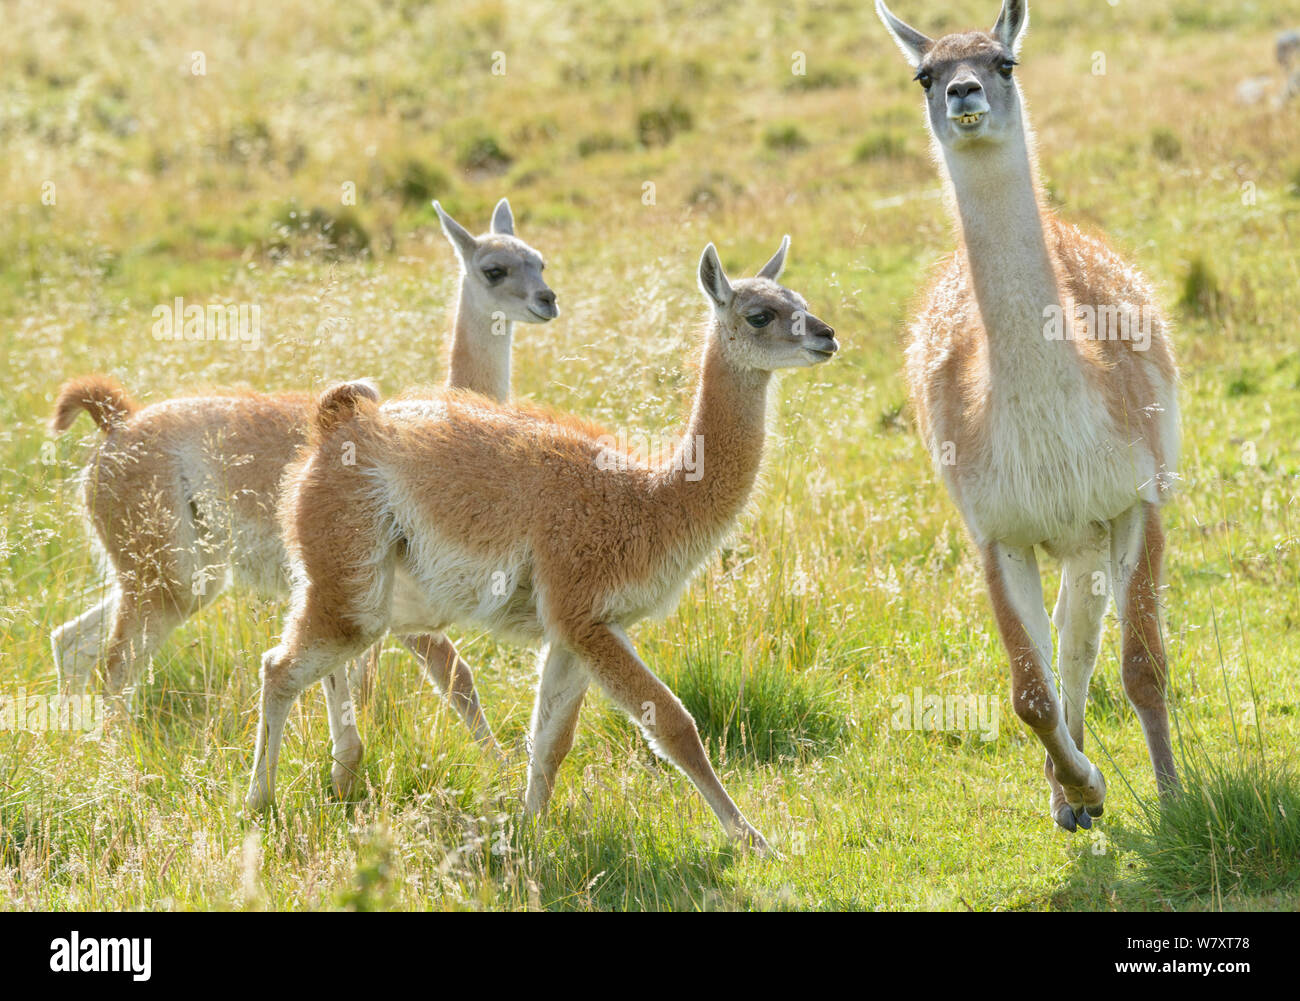 Guanaco (Lama guanicoe) adult and two juveniles running in grassland, Torres del Paine National Park, Chile. March. Stock Photo